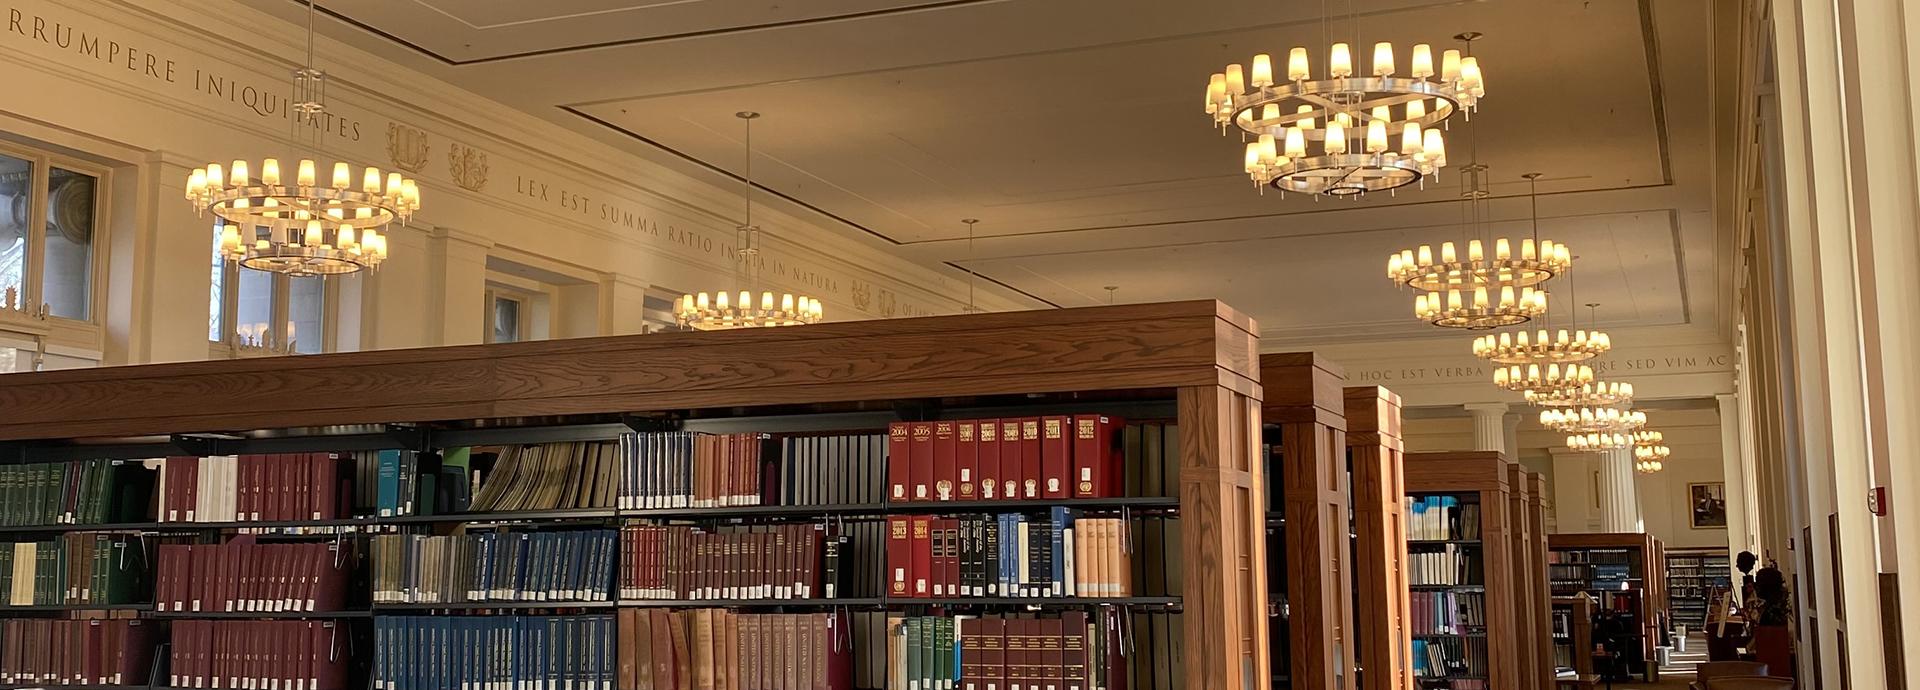 Book shelves and decorative lamps in a library at Harvard University